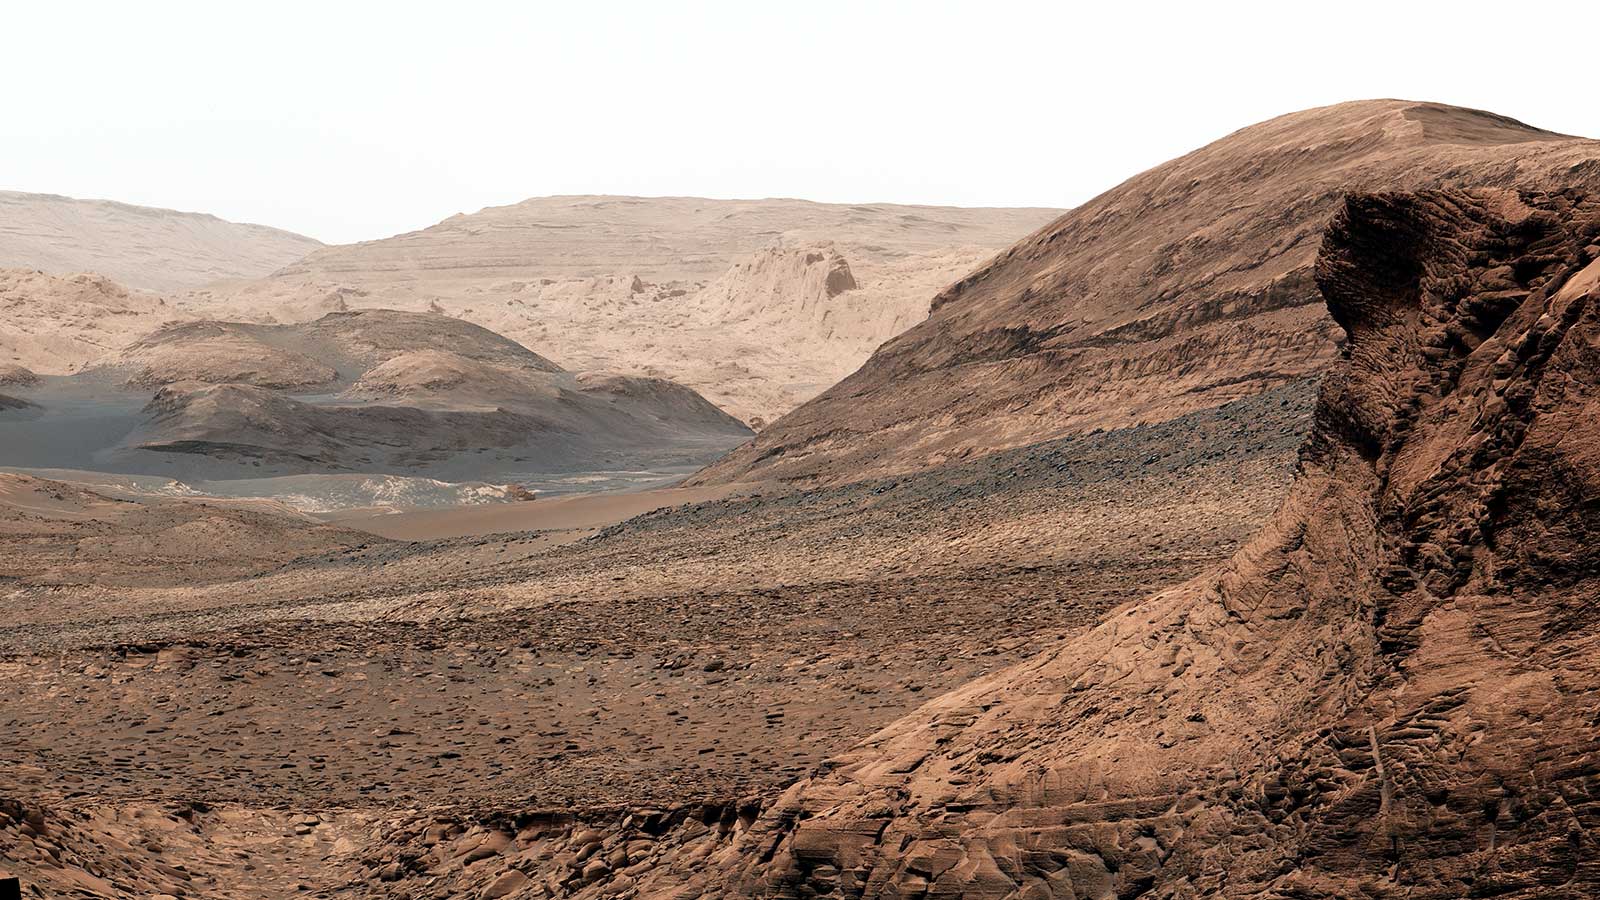 A sprawling landscape of ridges and valleys on Mars.